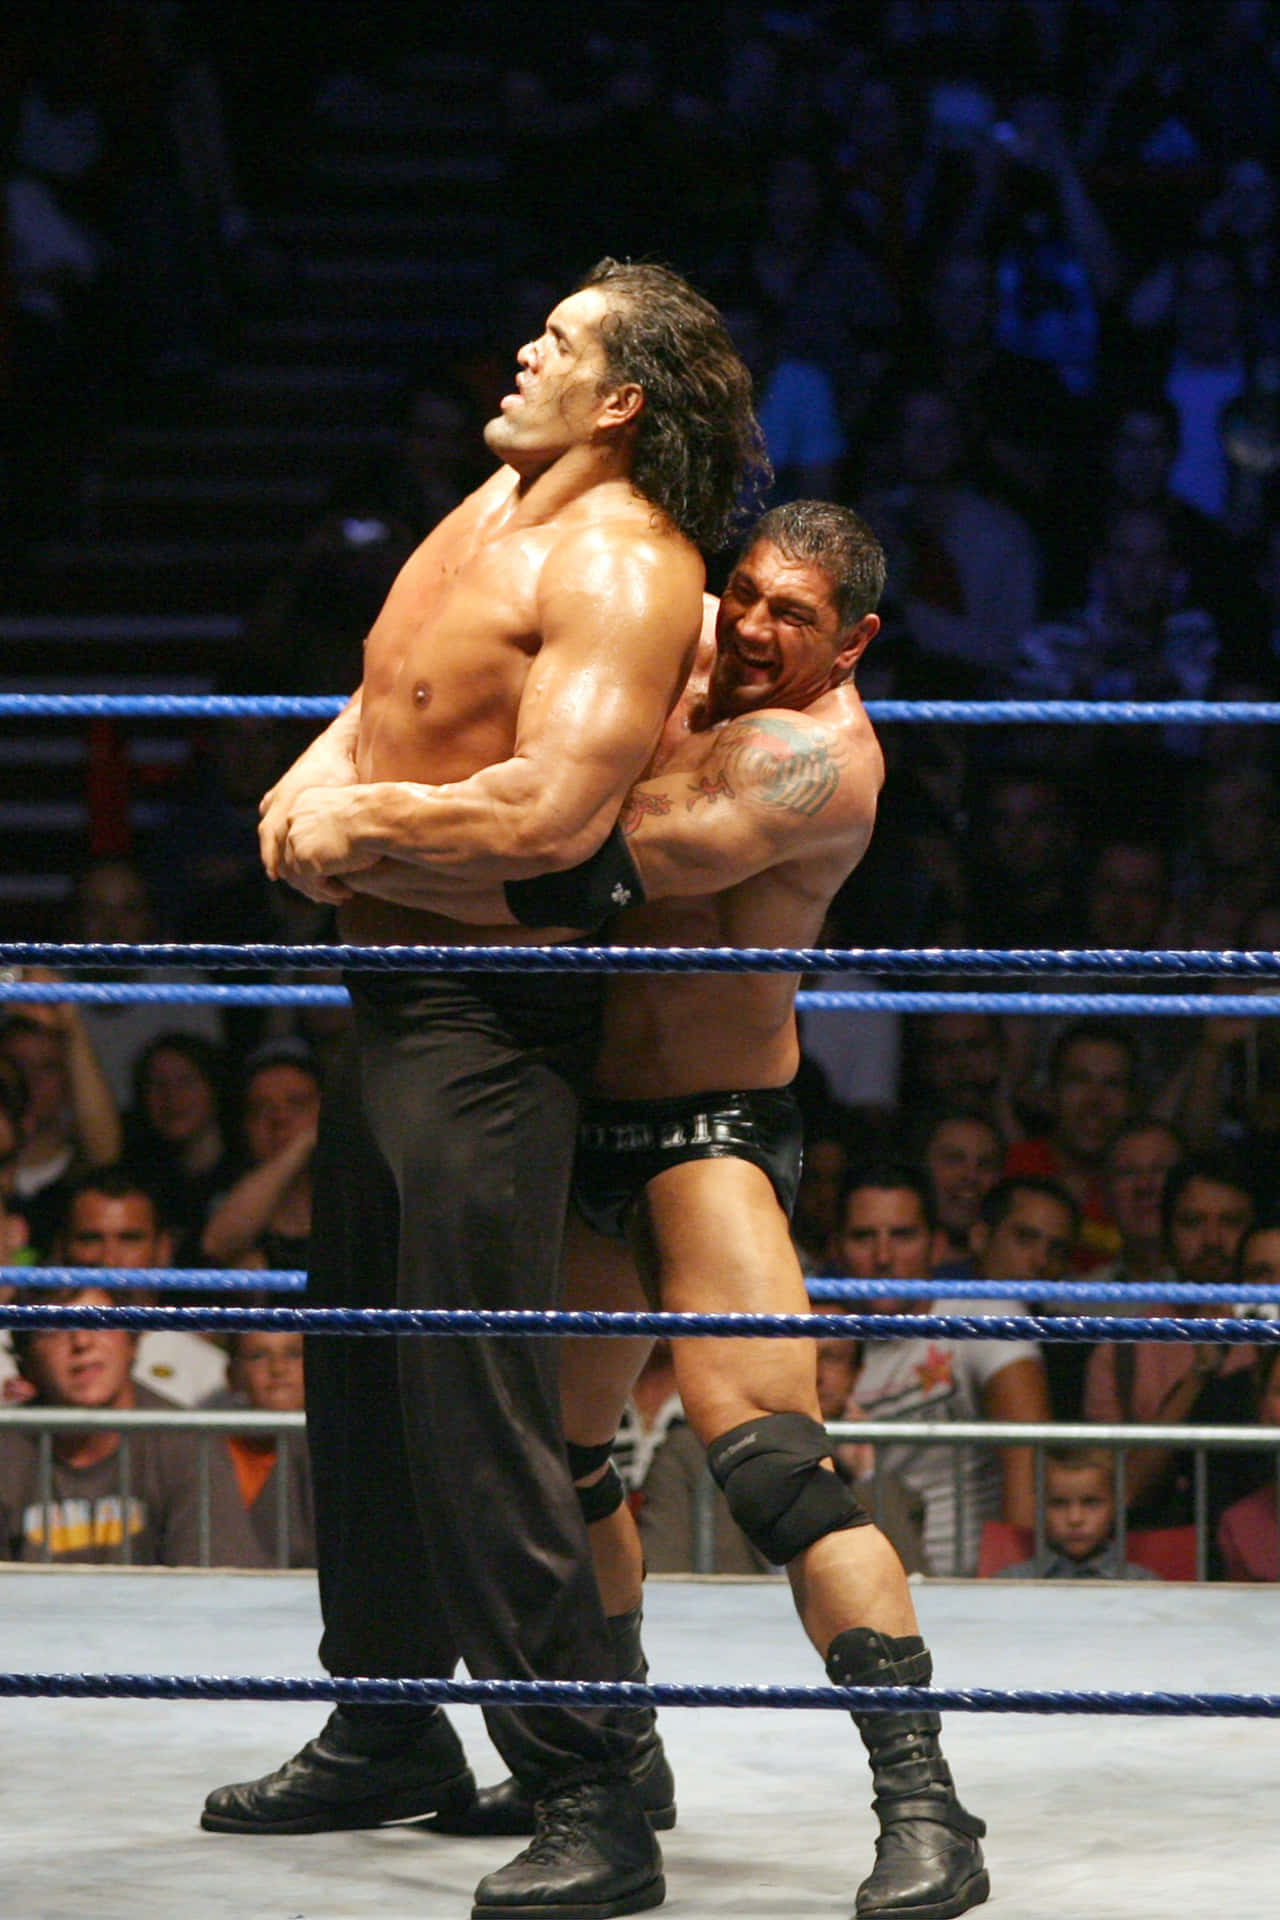 Indiskbrottare The Great Khali Wwe Smackdown Live Tour. Wallpaper